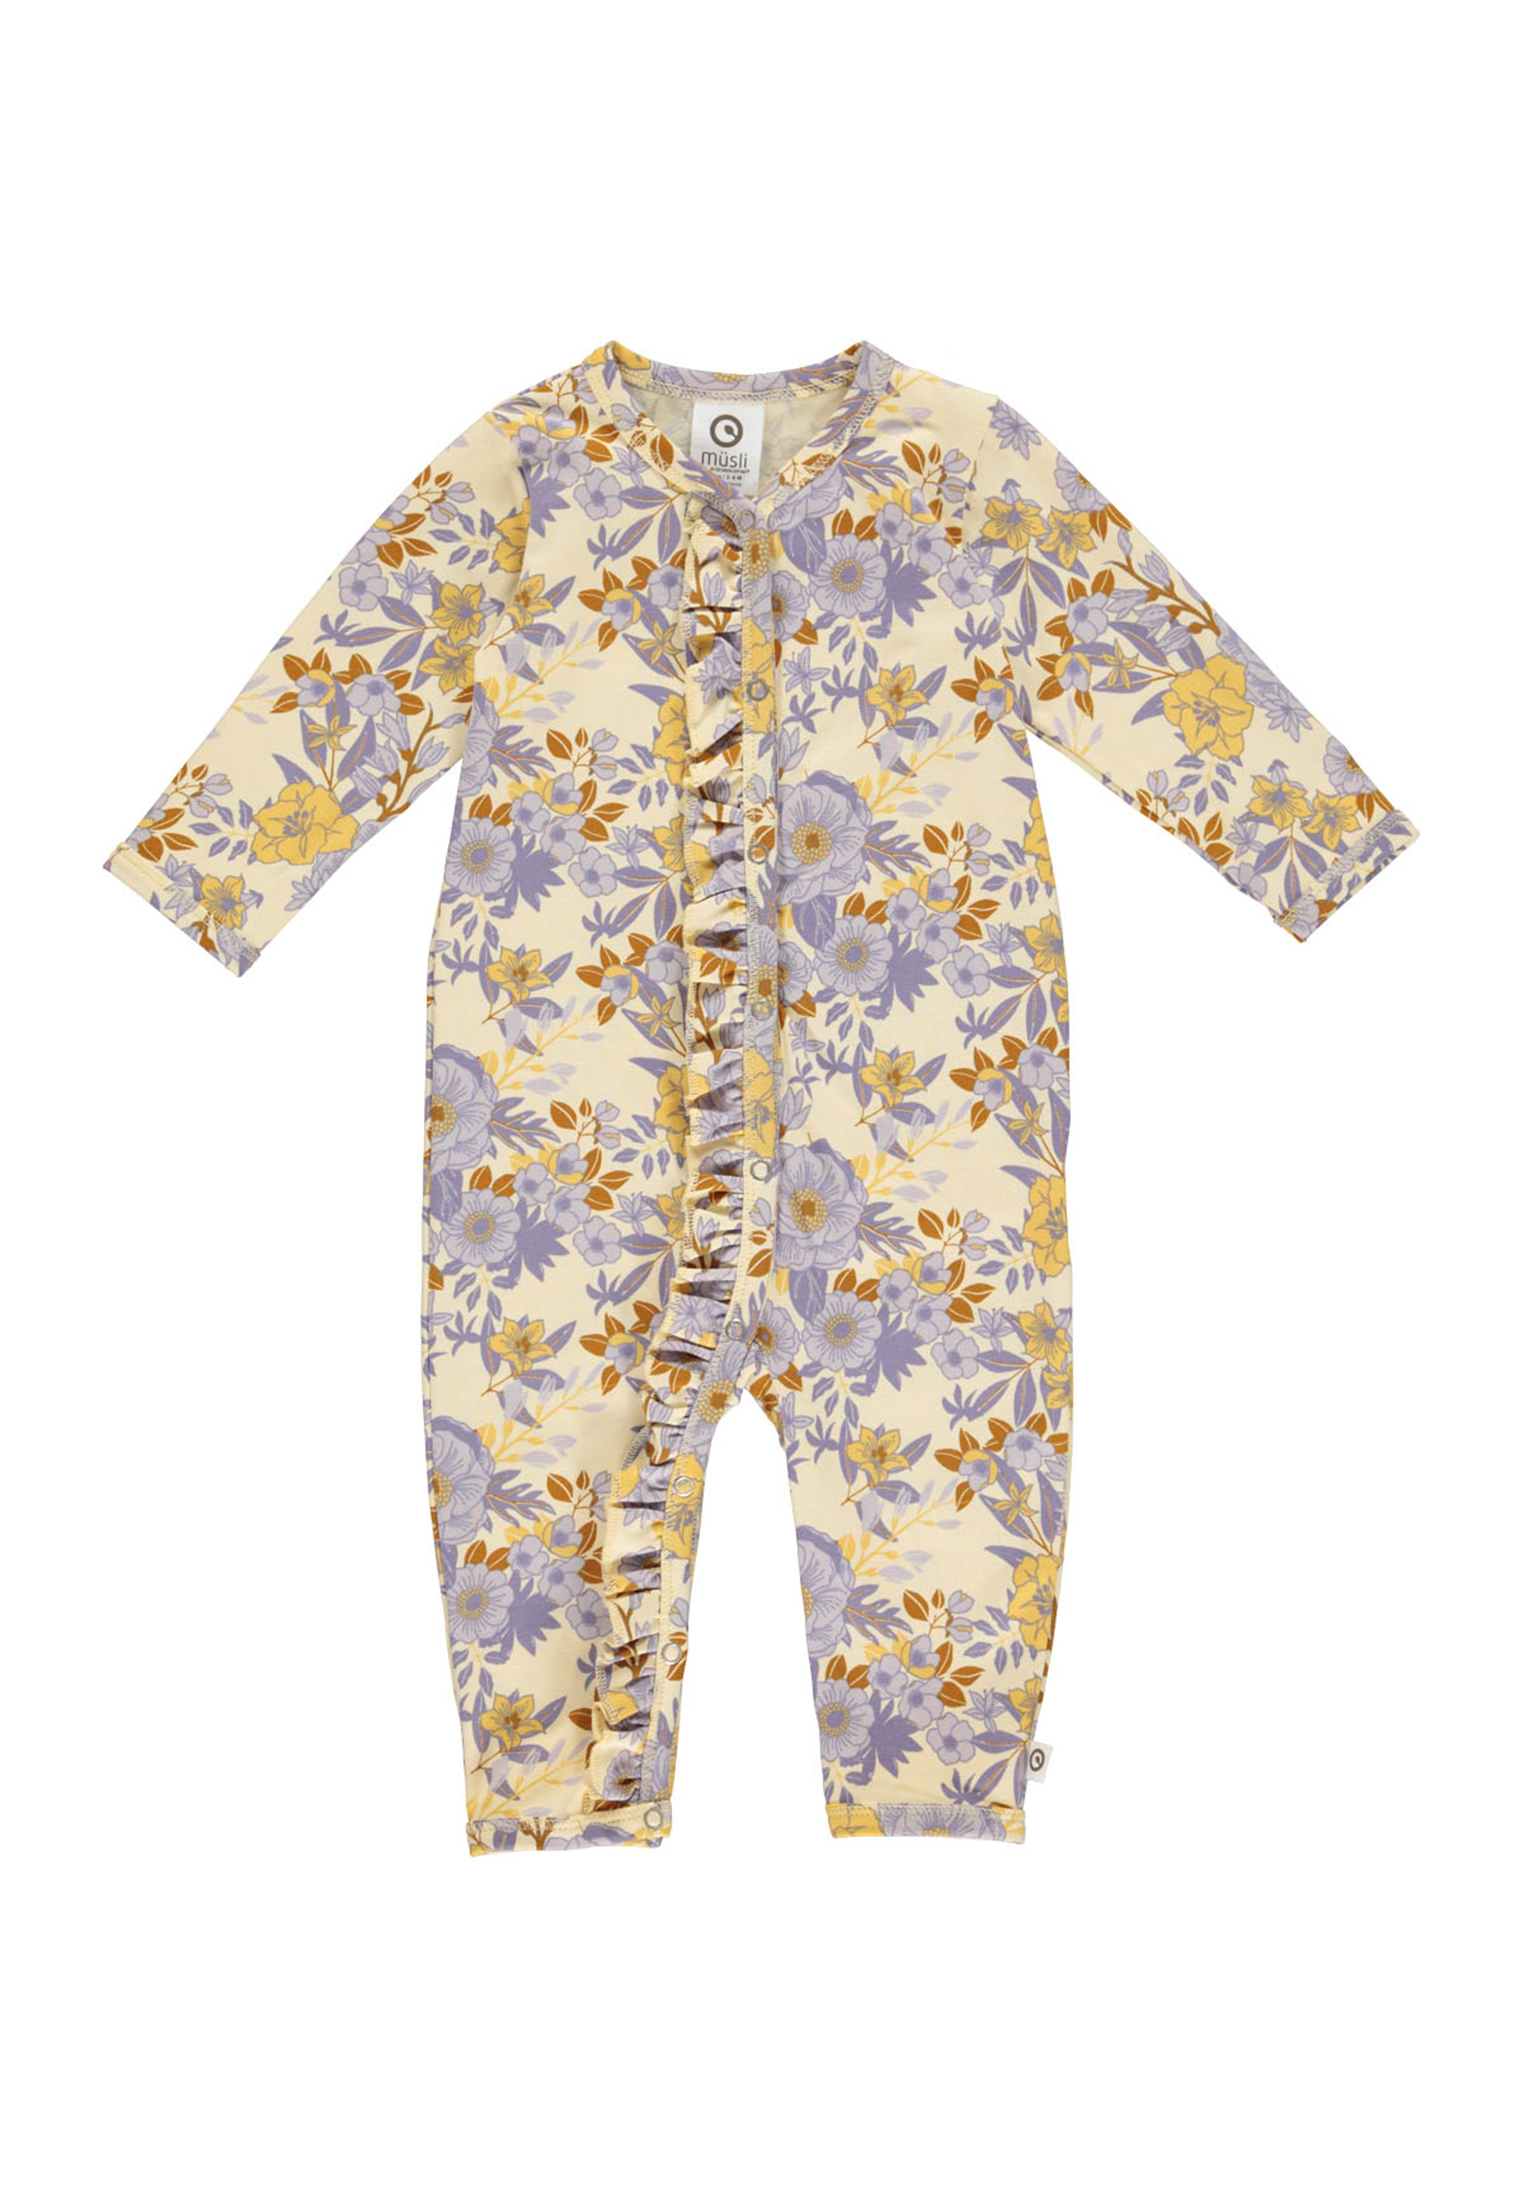 MAMA.LICIOUS Baby one-piece suit - 1584058800